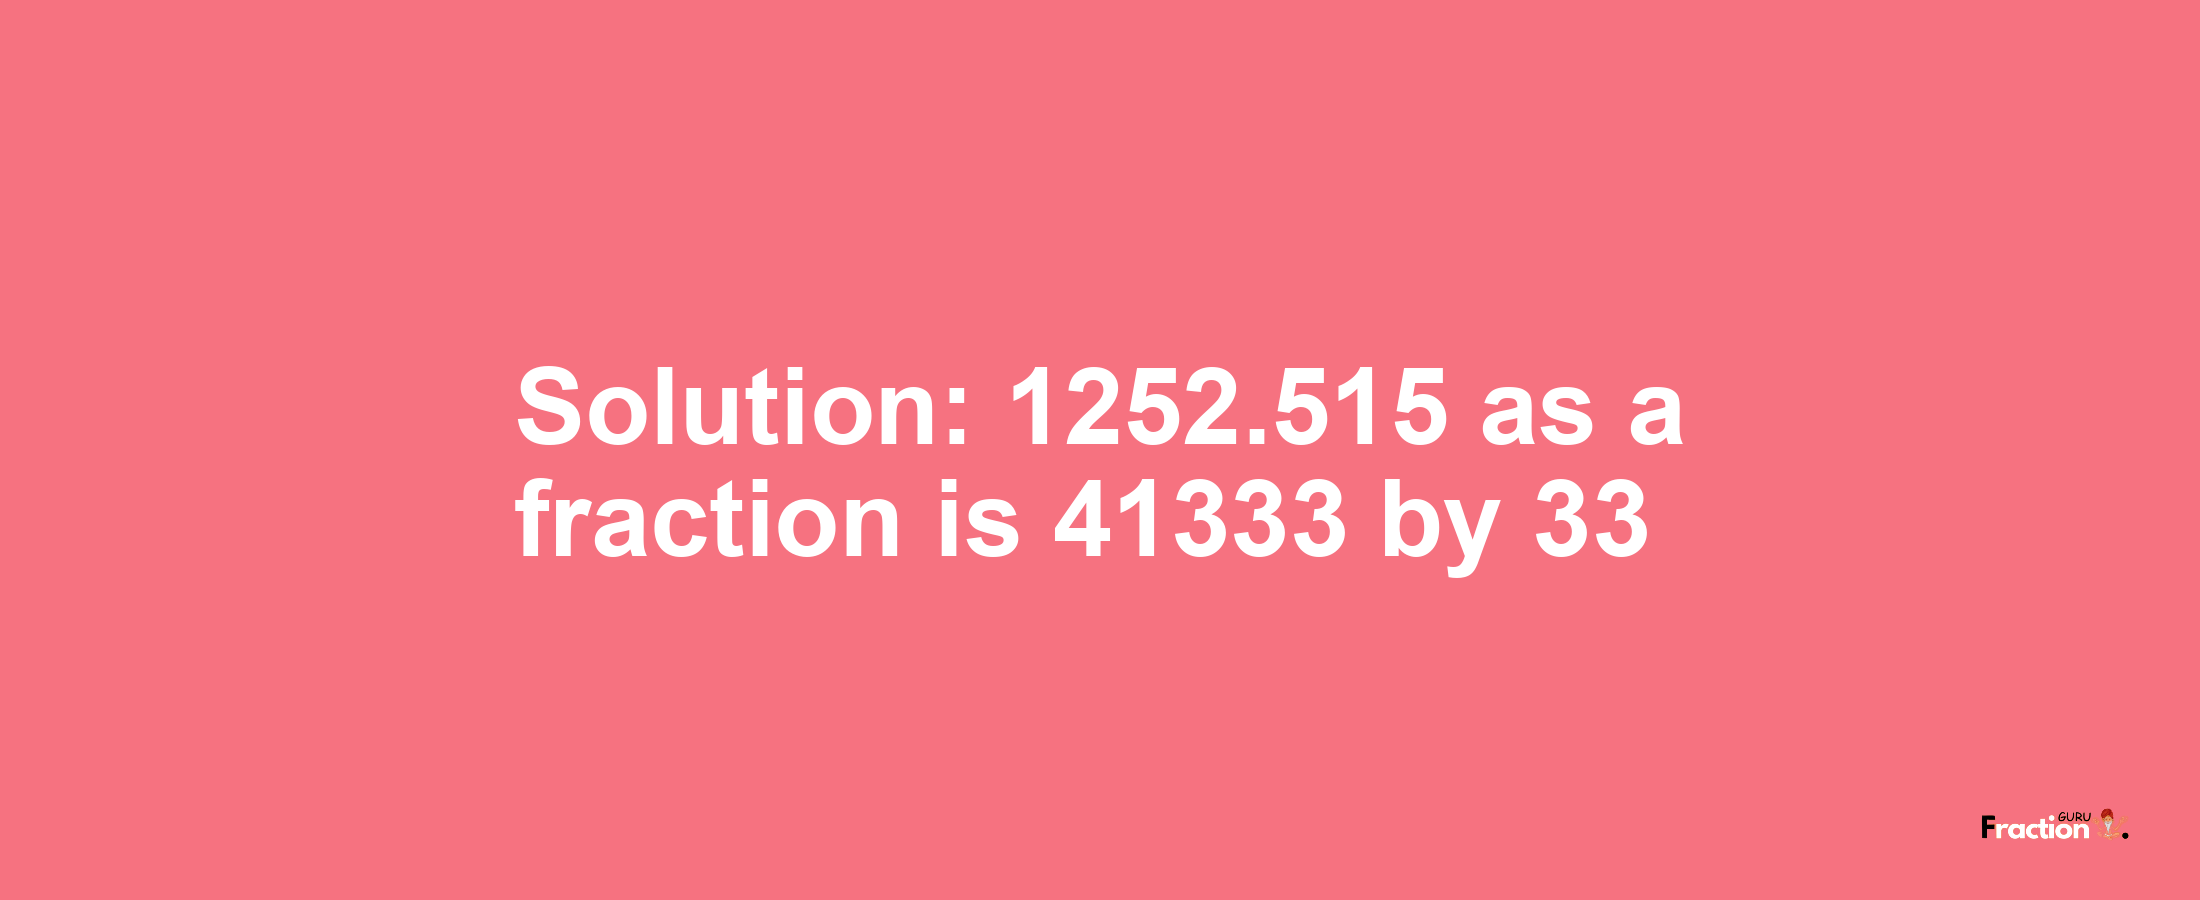 Solution:1252.515 as a fraction is 41333/33